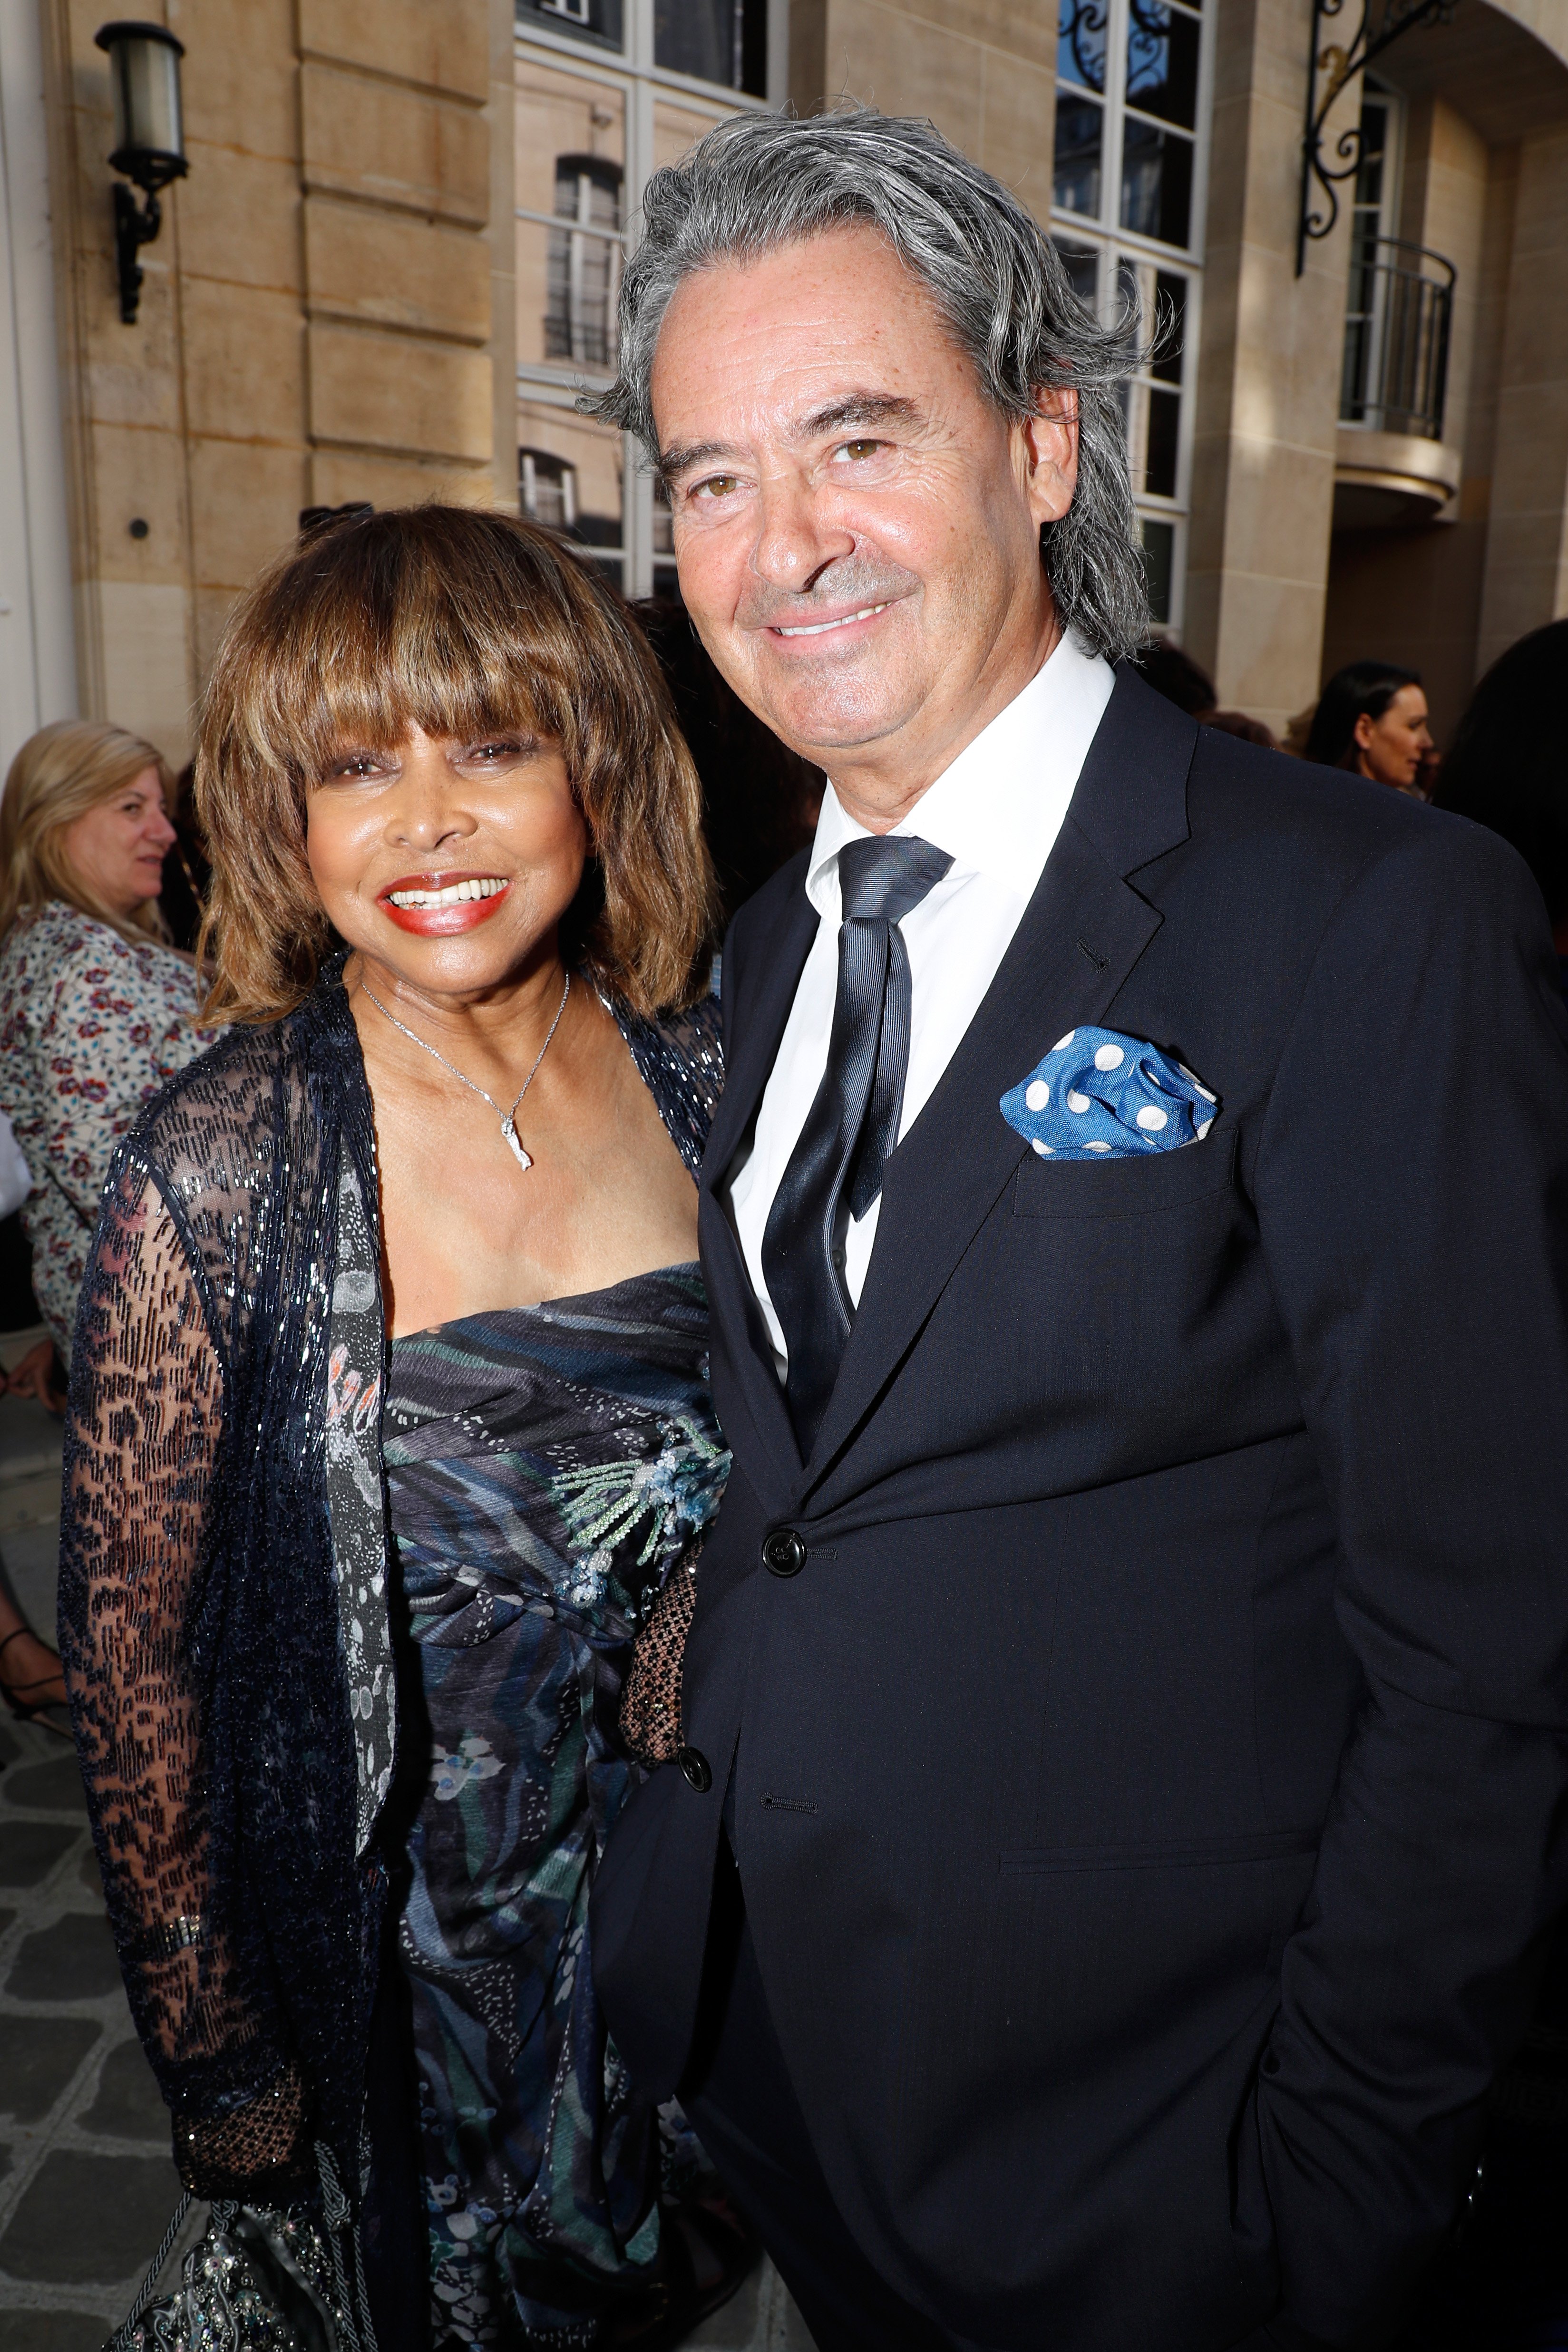 Singer Tina Turner and her husband Erwin Bach at the Giorgio Armani Prive Haute Couture Fall Winter 2018/2019 show as part of Paris Fashion Week on July 3, 2018 in Paris, France. | Source: Getty Images